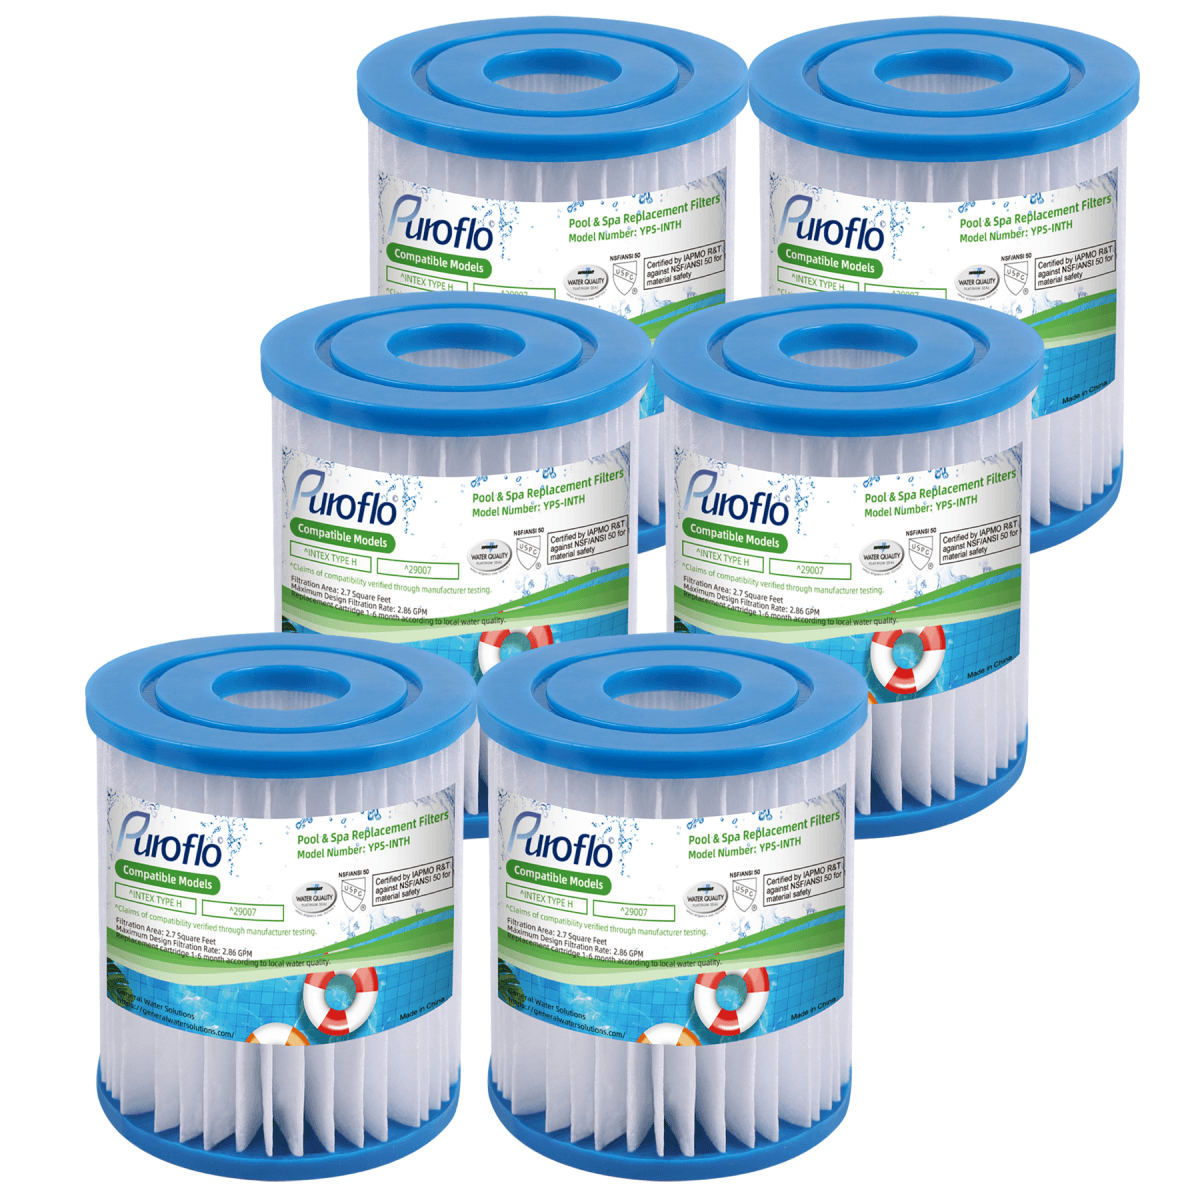 Puroflo Type H 29007E Replacement Pool Filter Cartridge for INTEX (6 Pack)